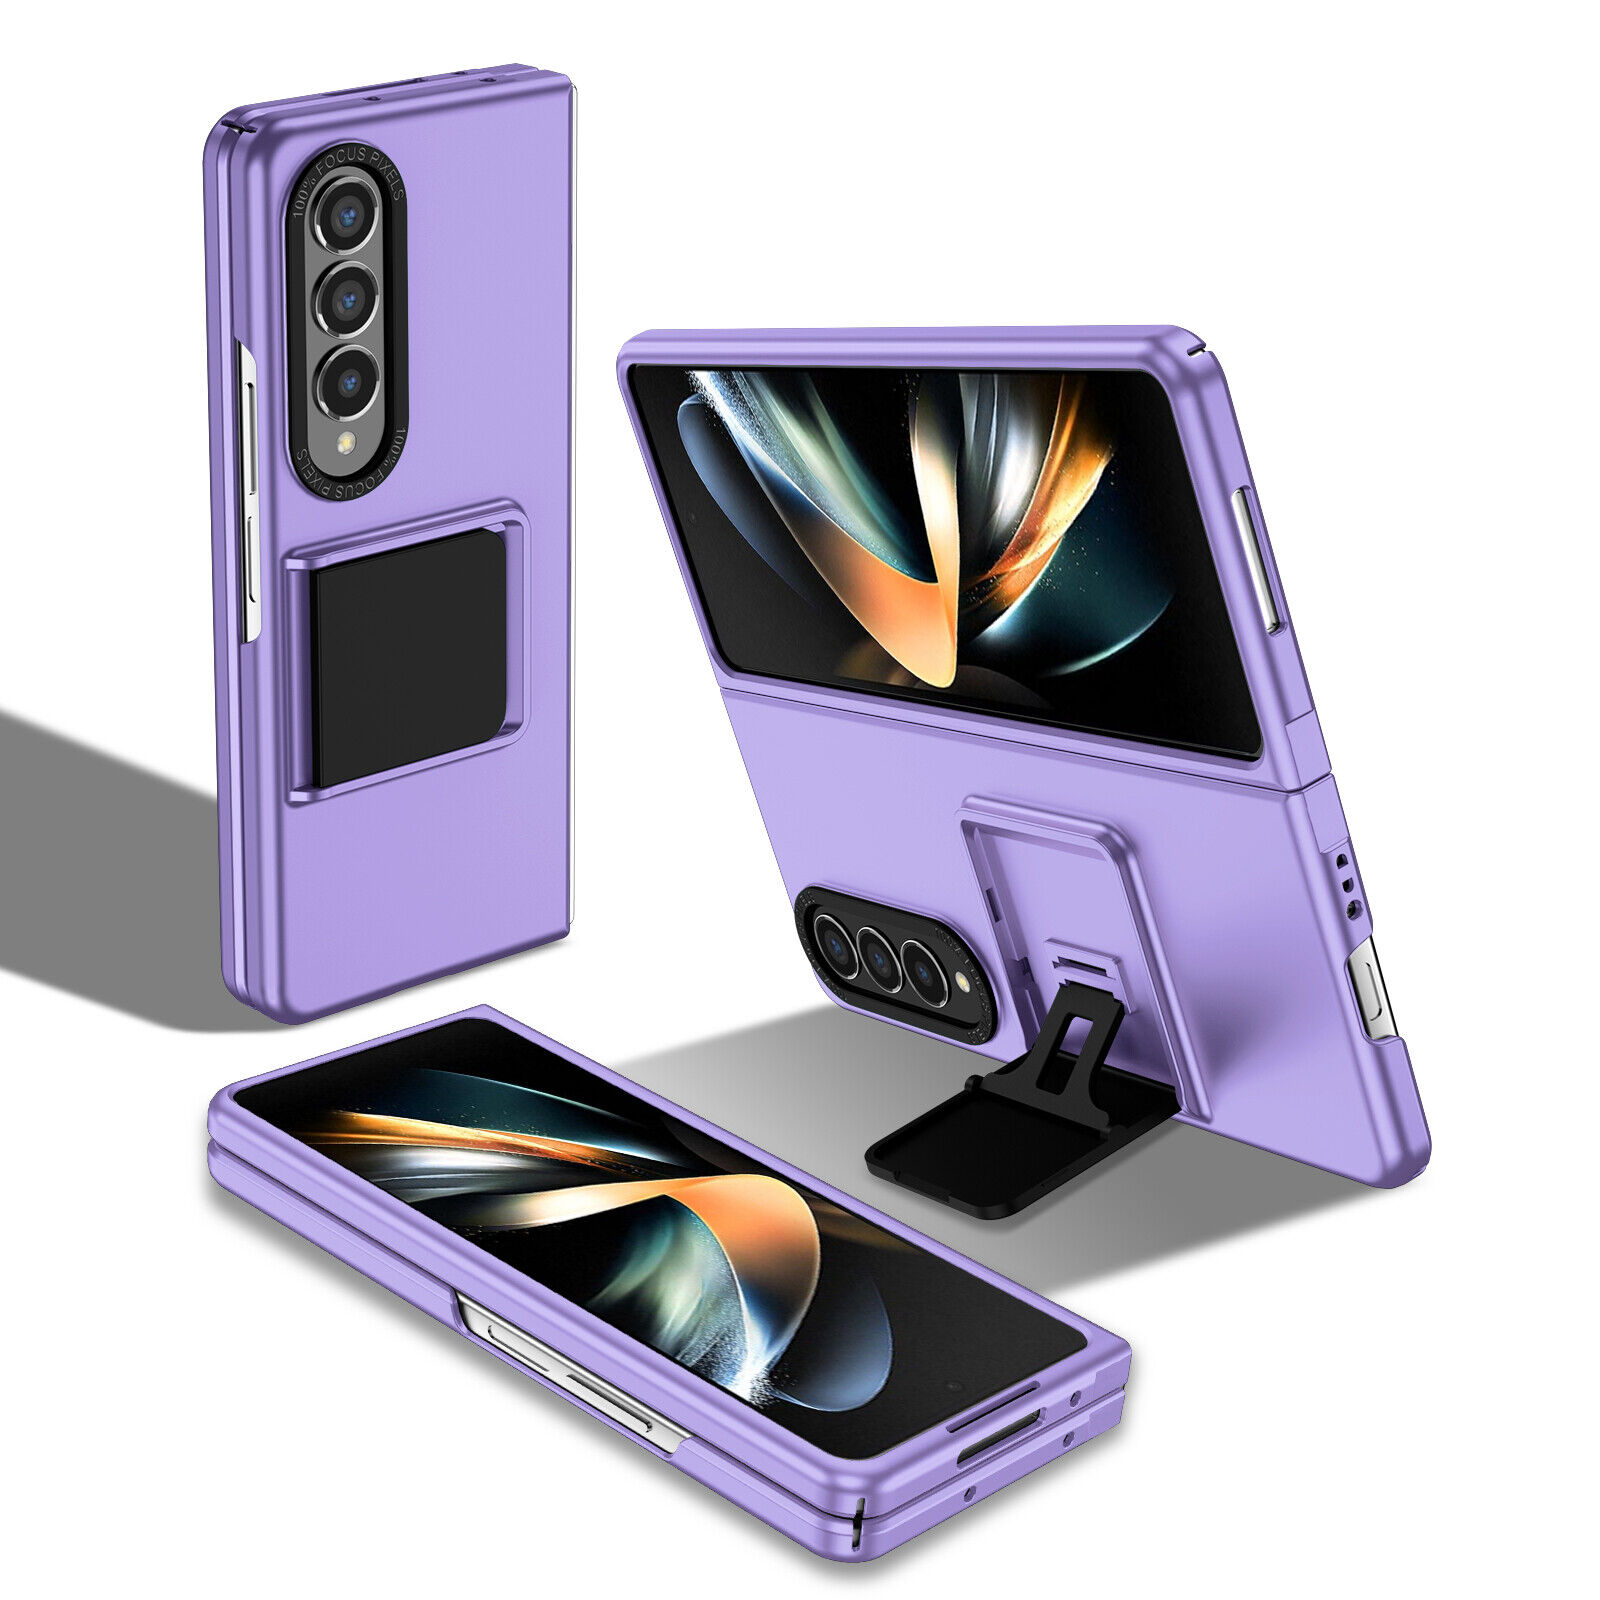 Samsung Galaxy Z Fold 4 Fold 3 5G Shockproof Case Slim Fold Stand Hard Cover Purle